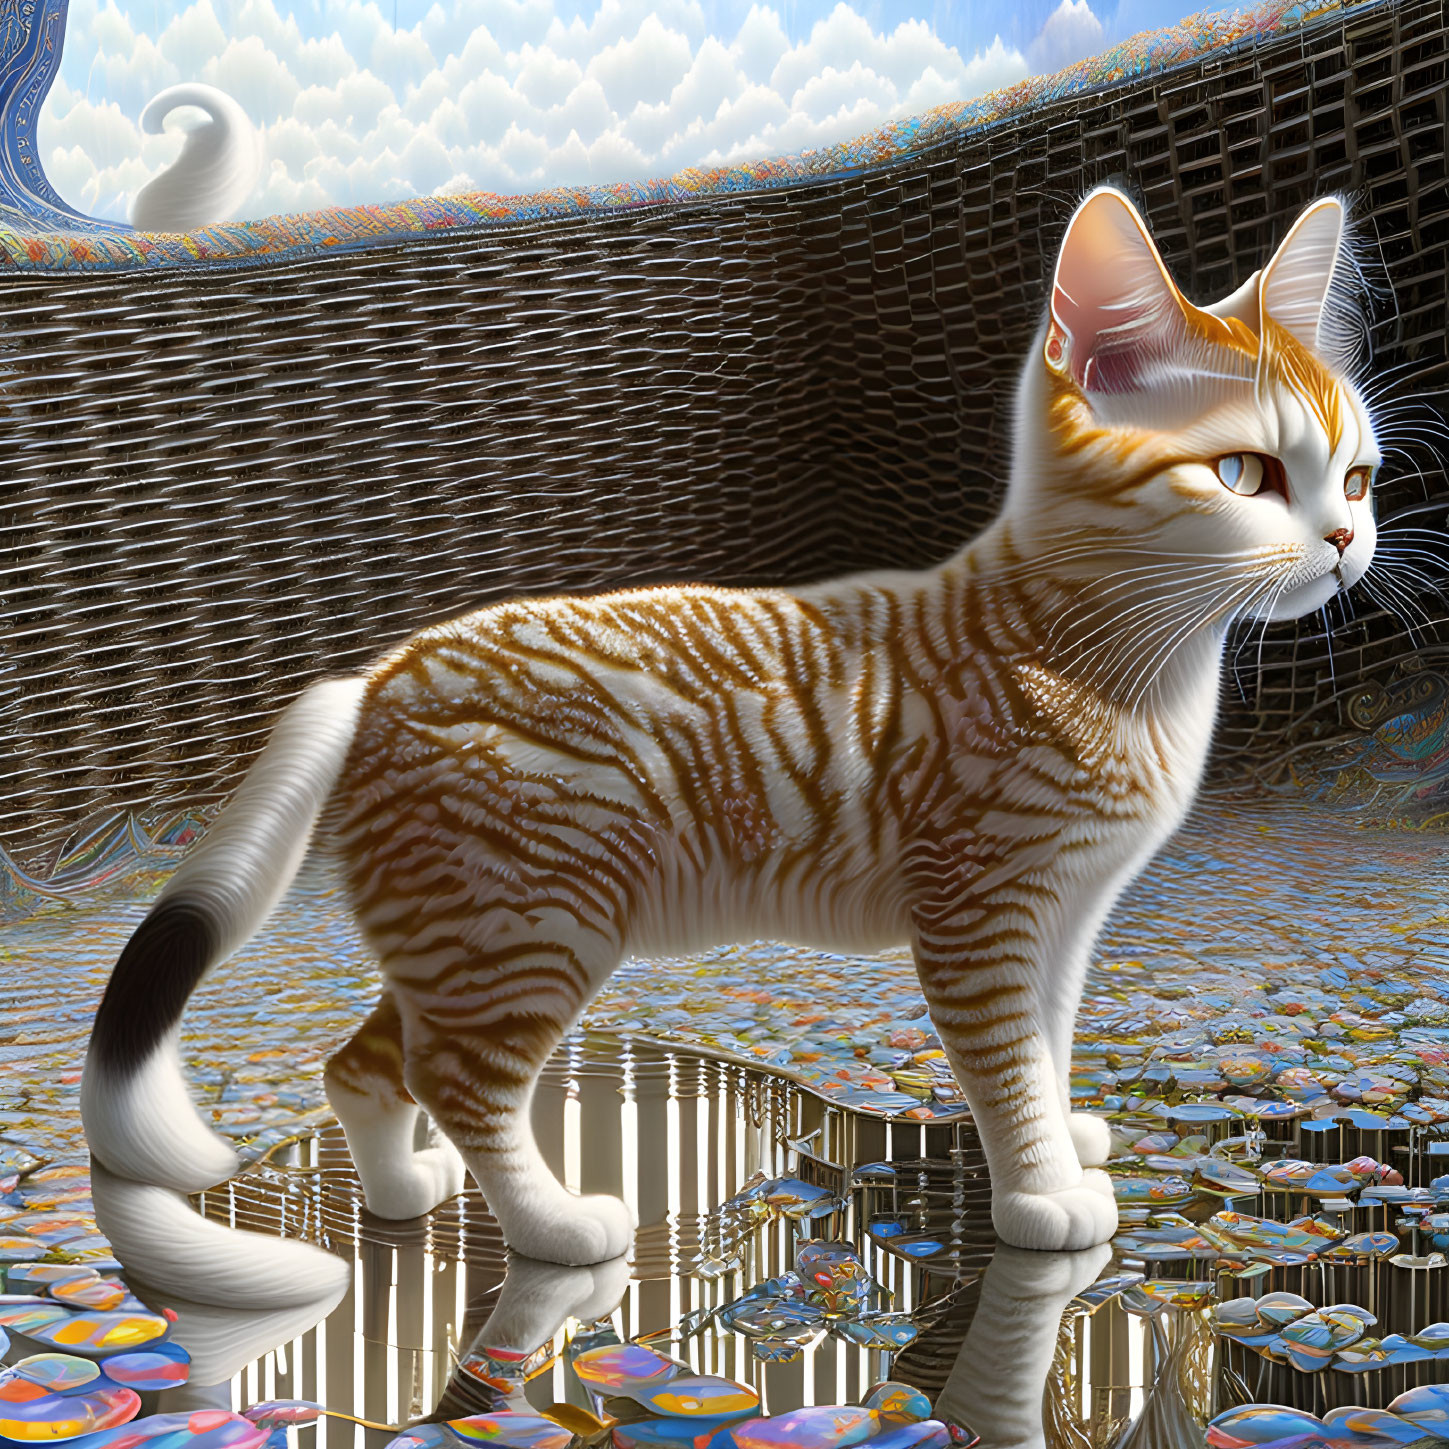 Surreal digitally rendered cat with intricate fur patterns in reflective mosaic environment